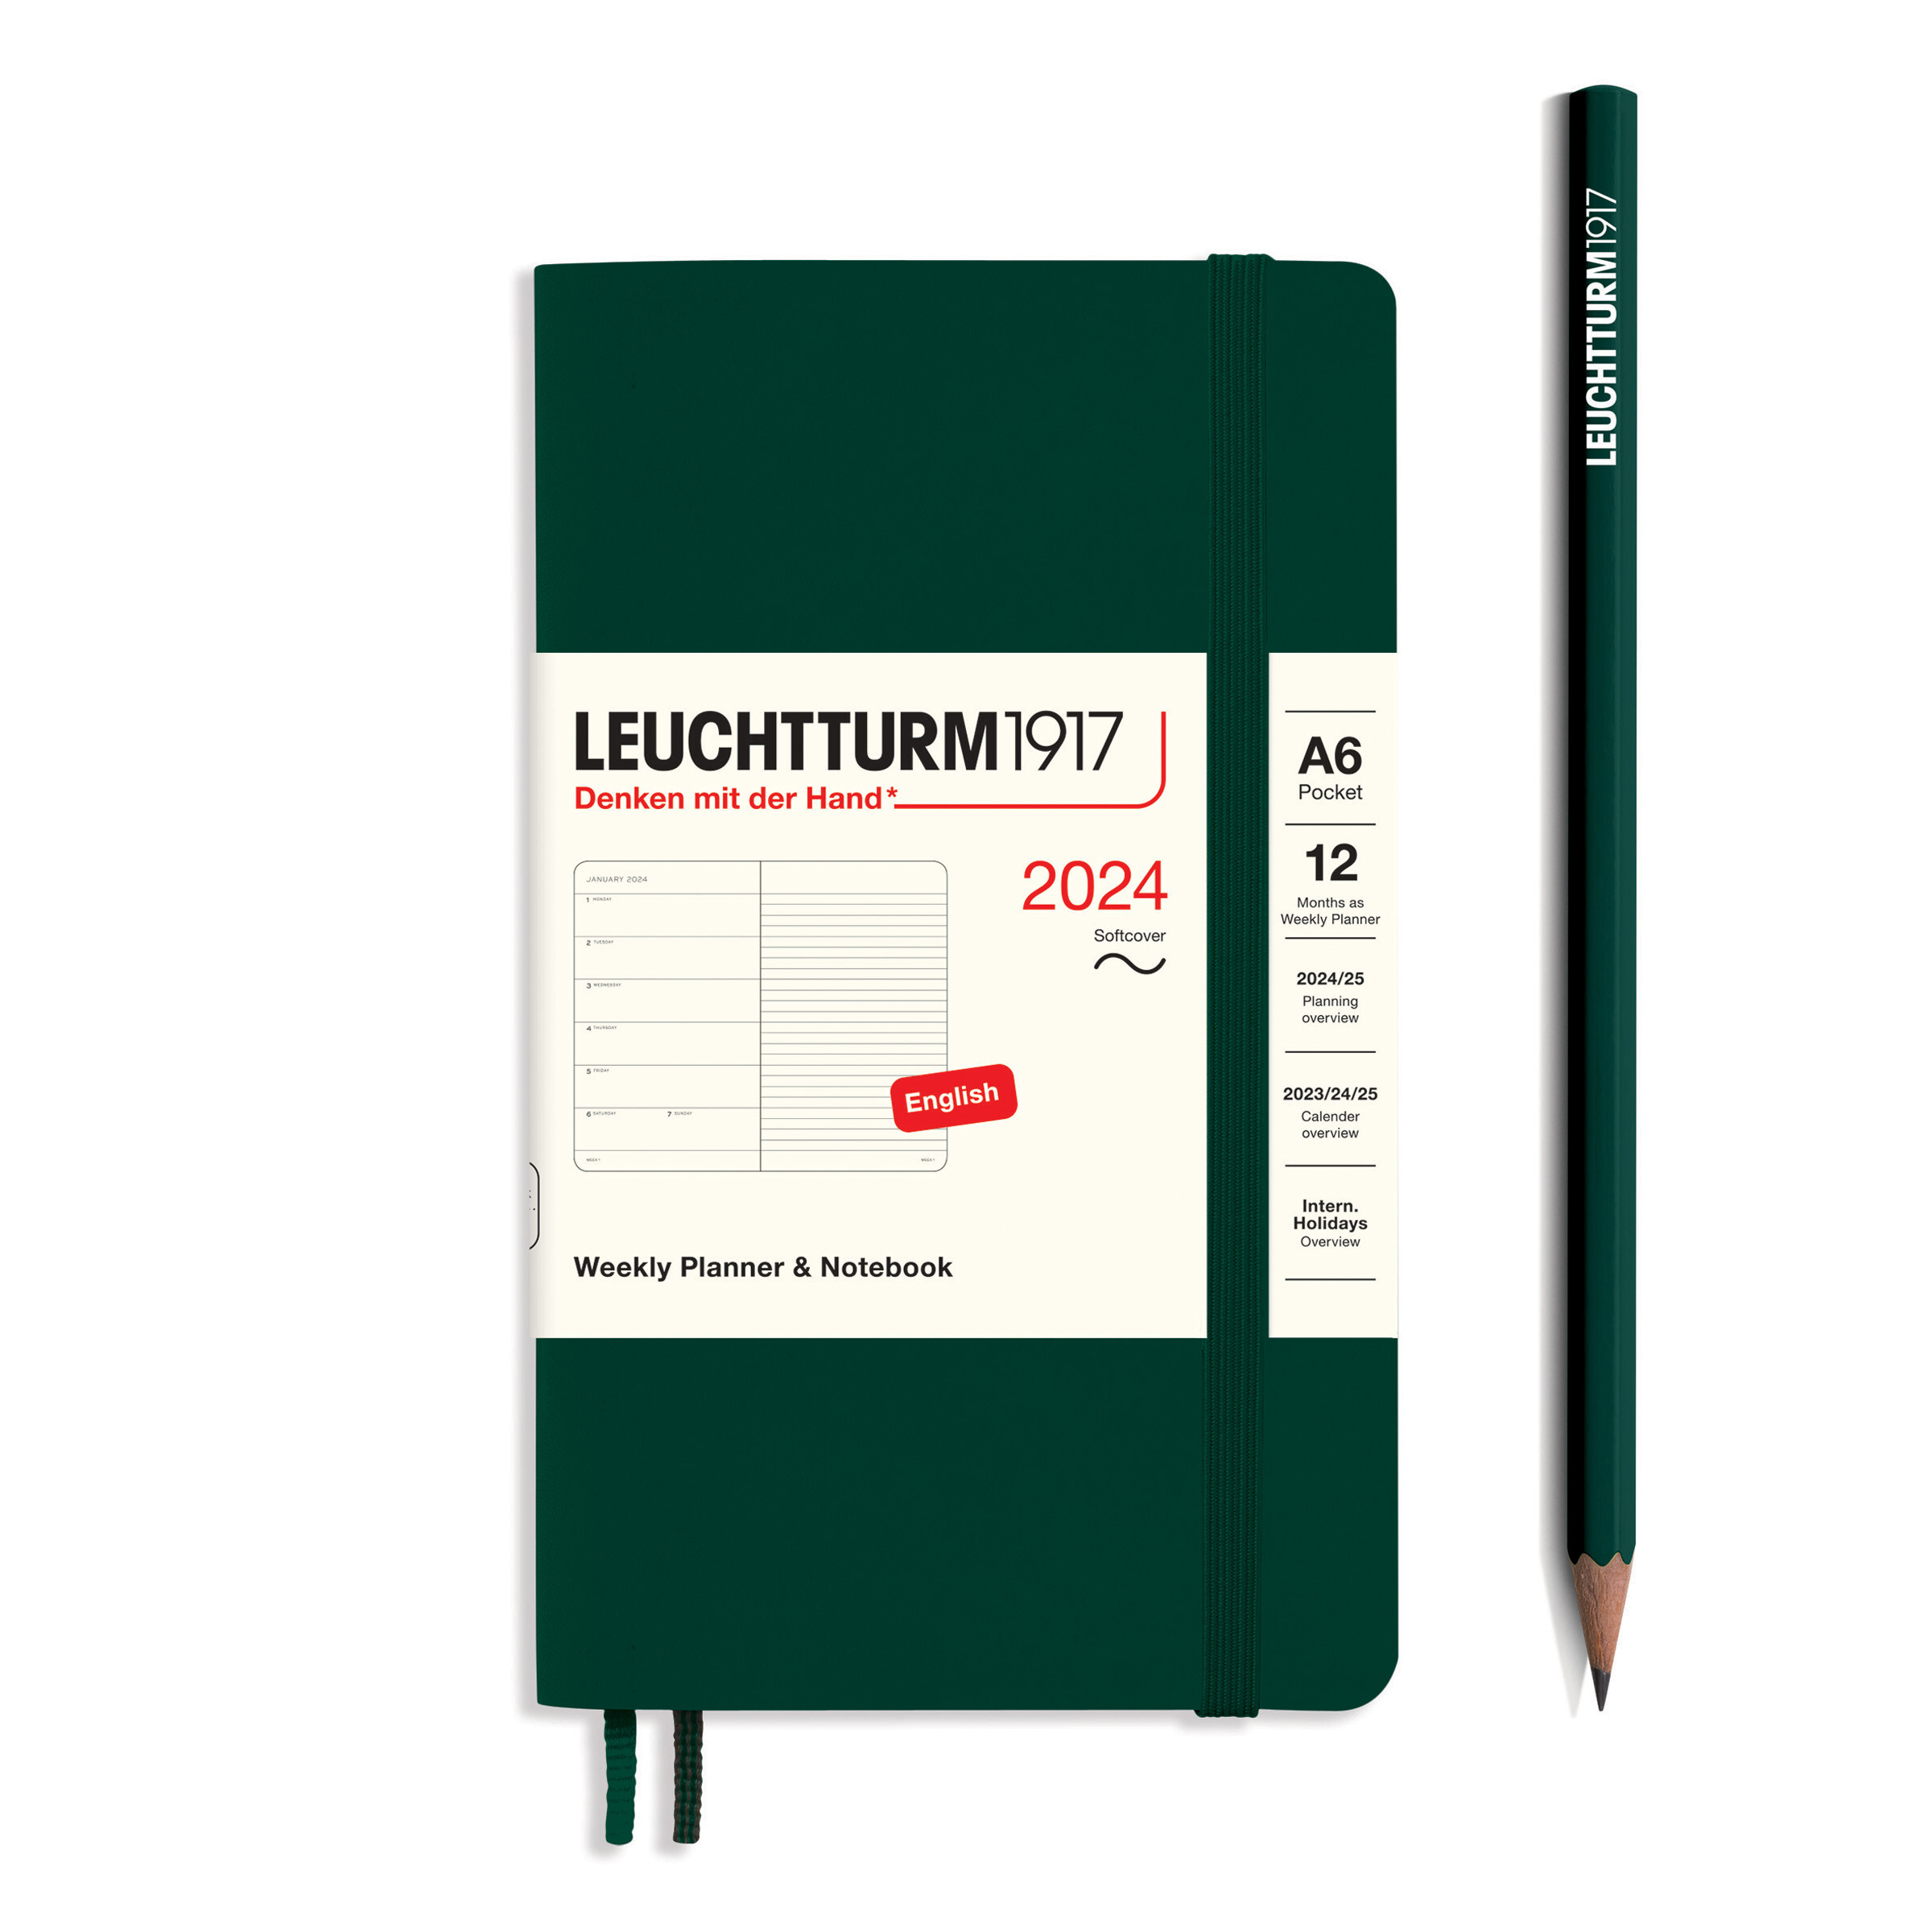 Leuchtturm1917 Weekly Planner & Notebook Soft Cover Pocket A6 2024 - Pencraft the boutique